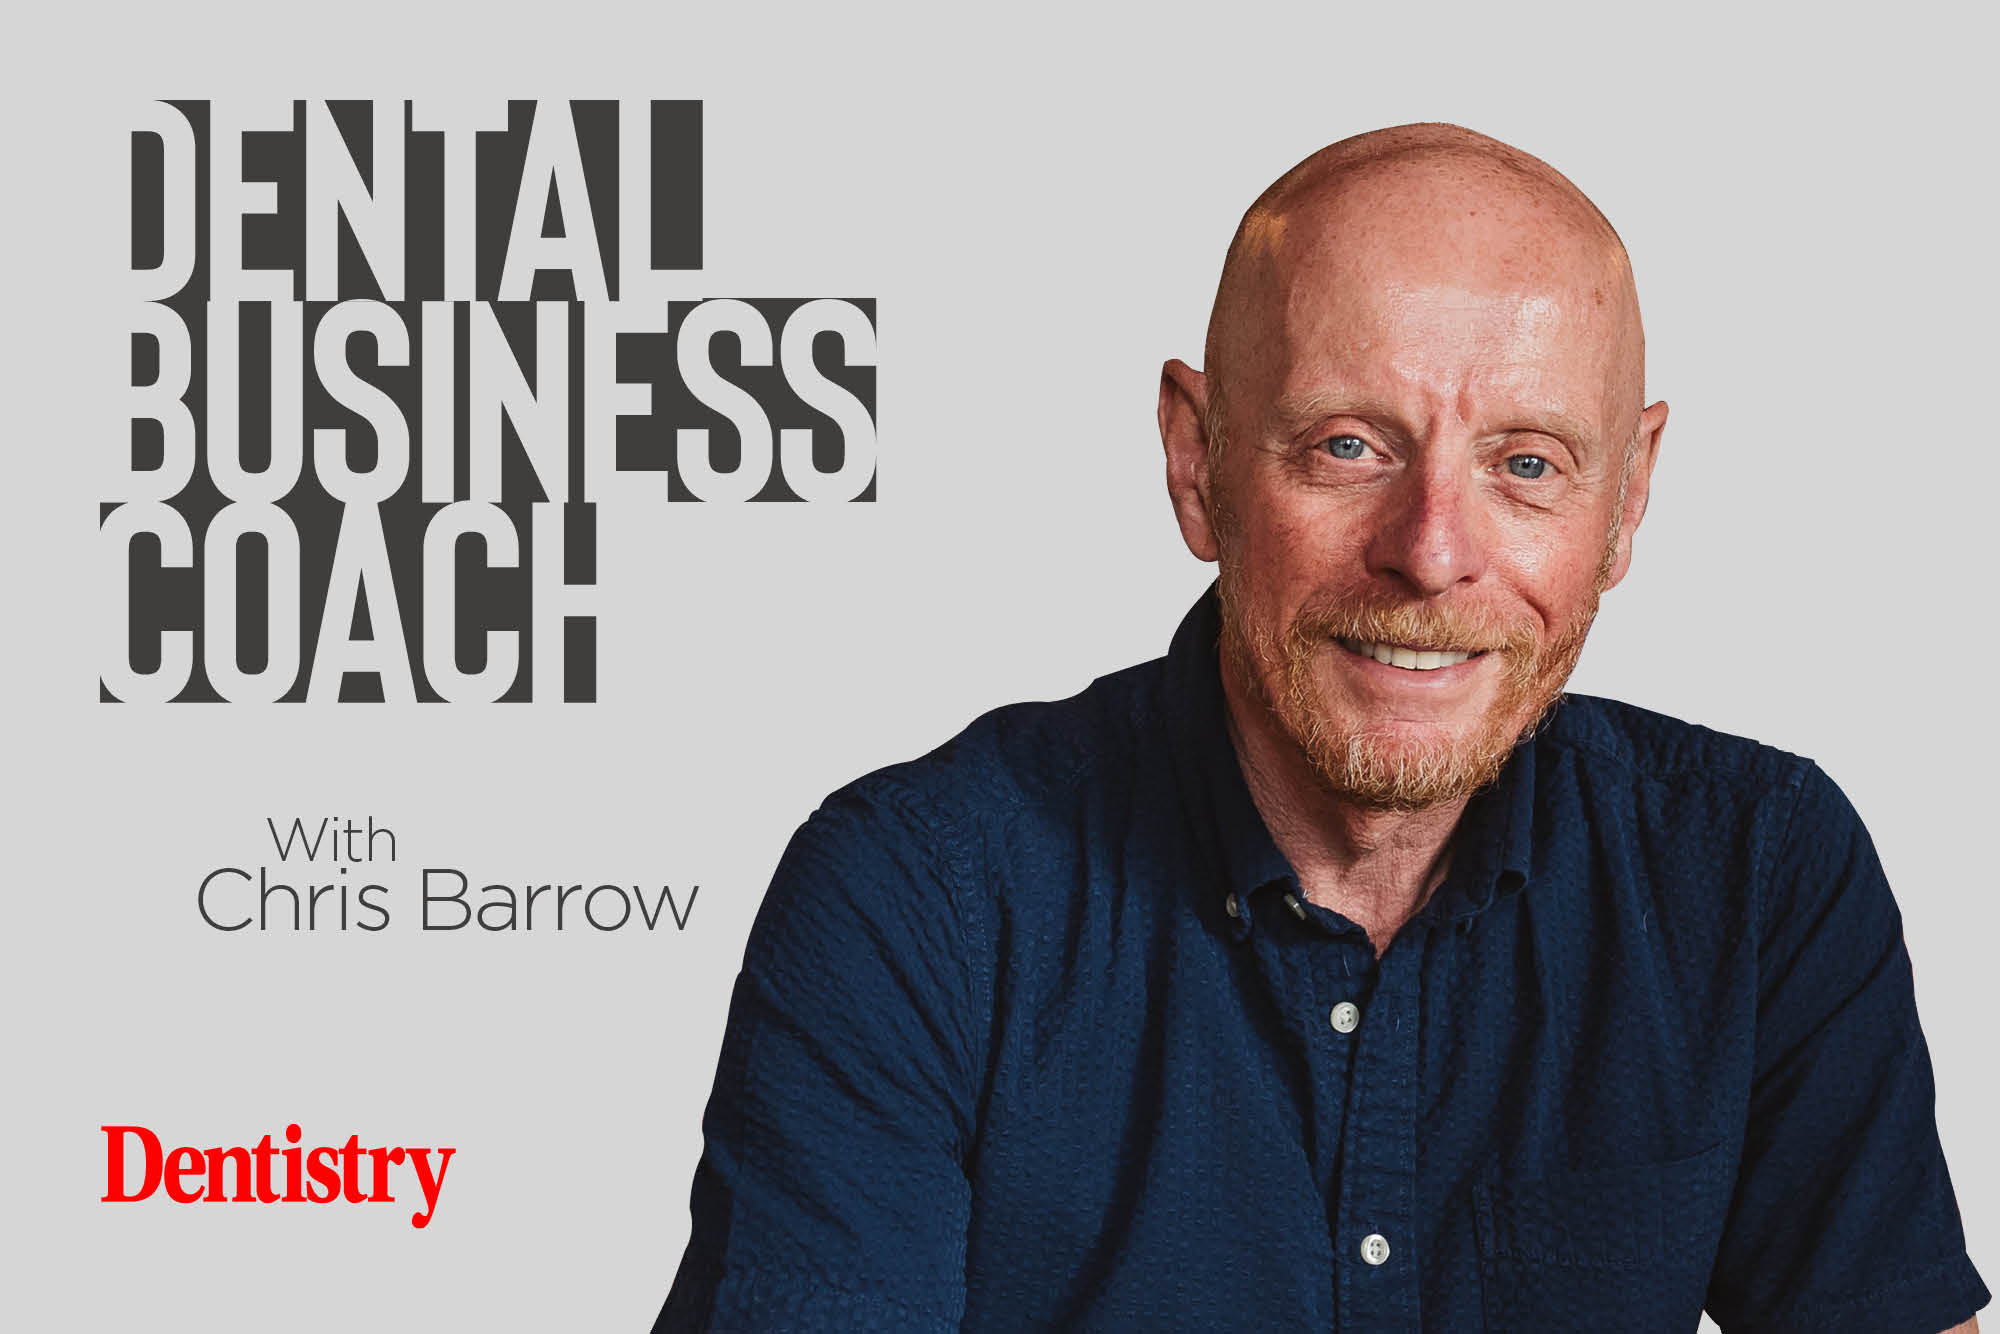 chris barrow dental business coach discusses bargains and buyouts